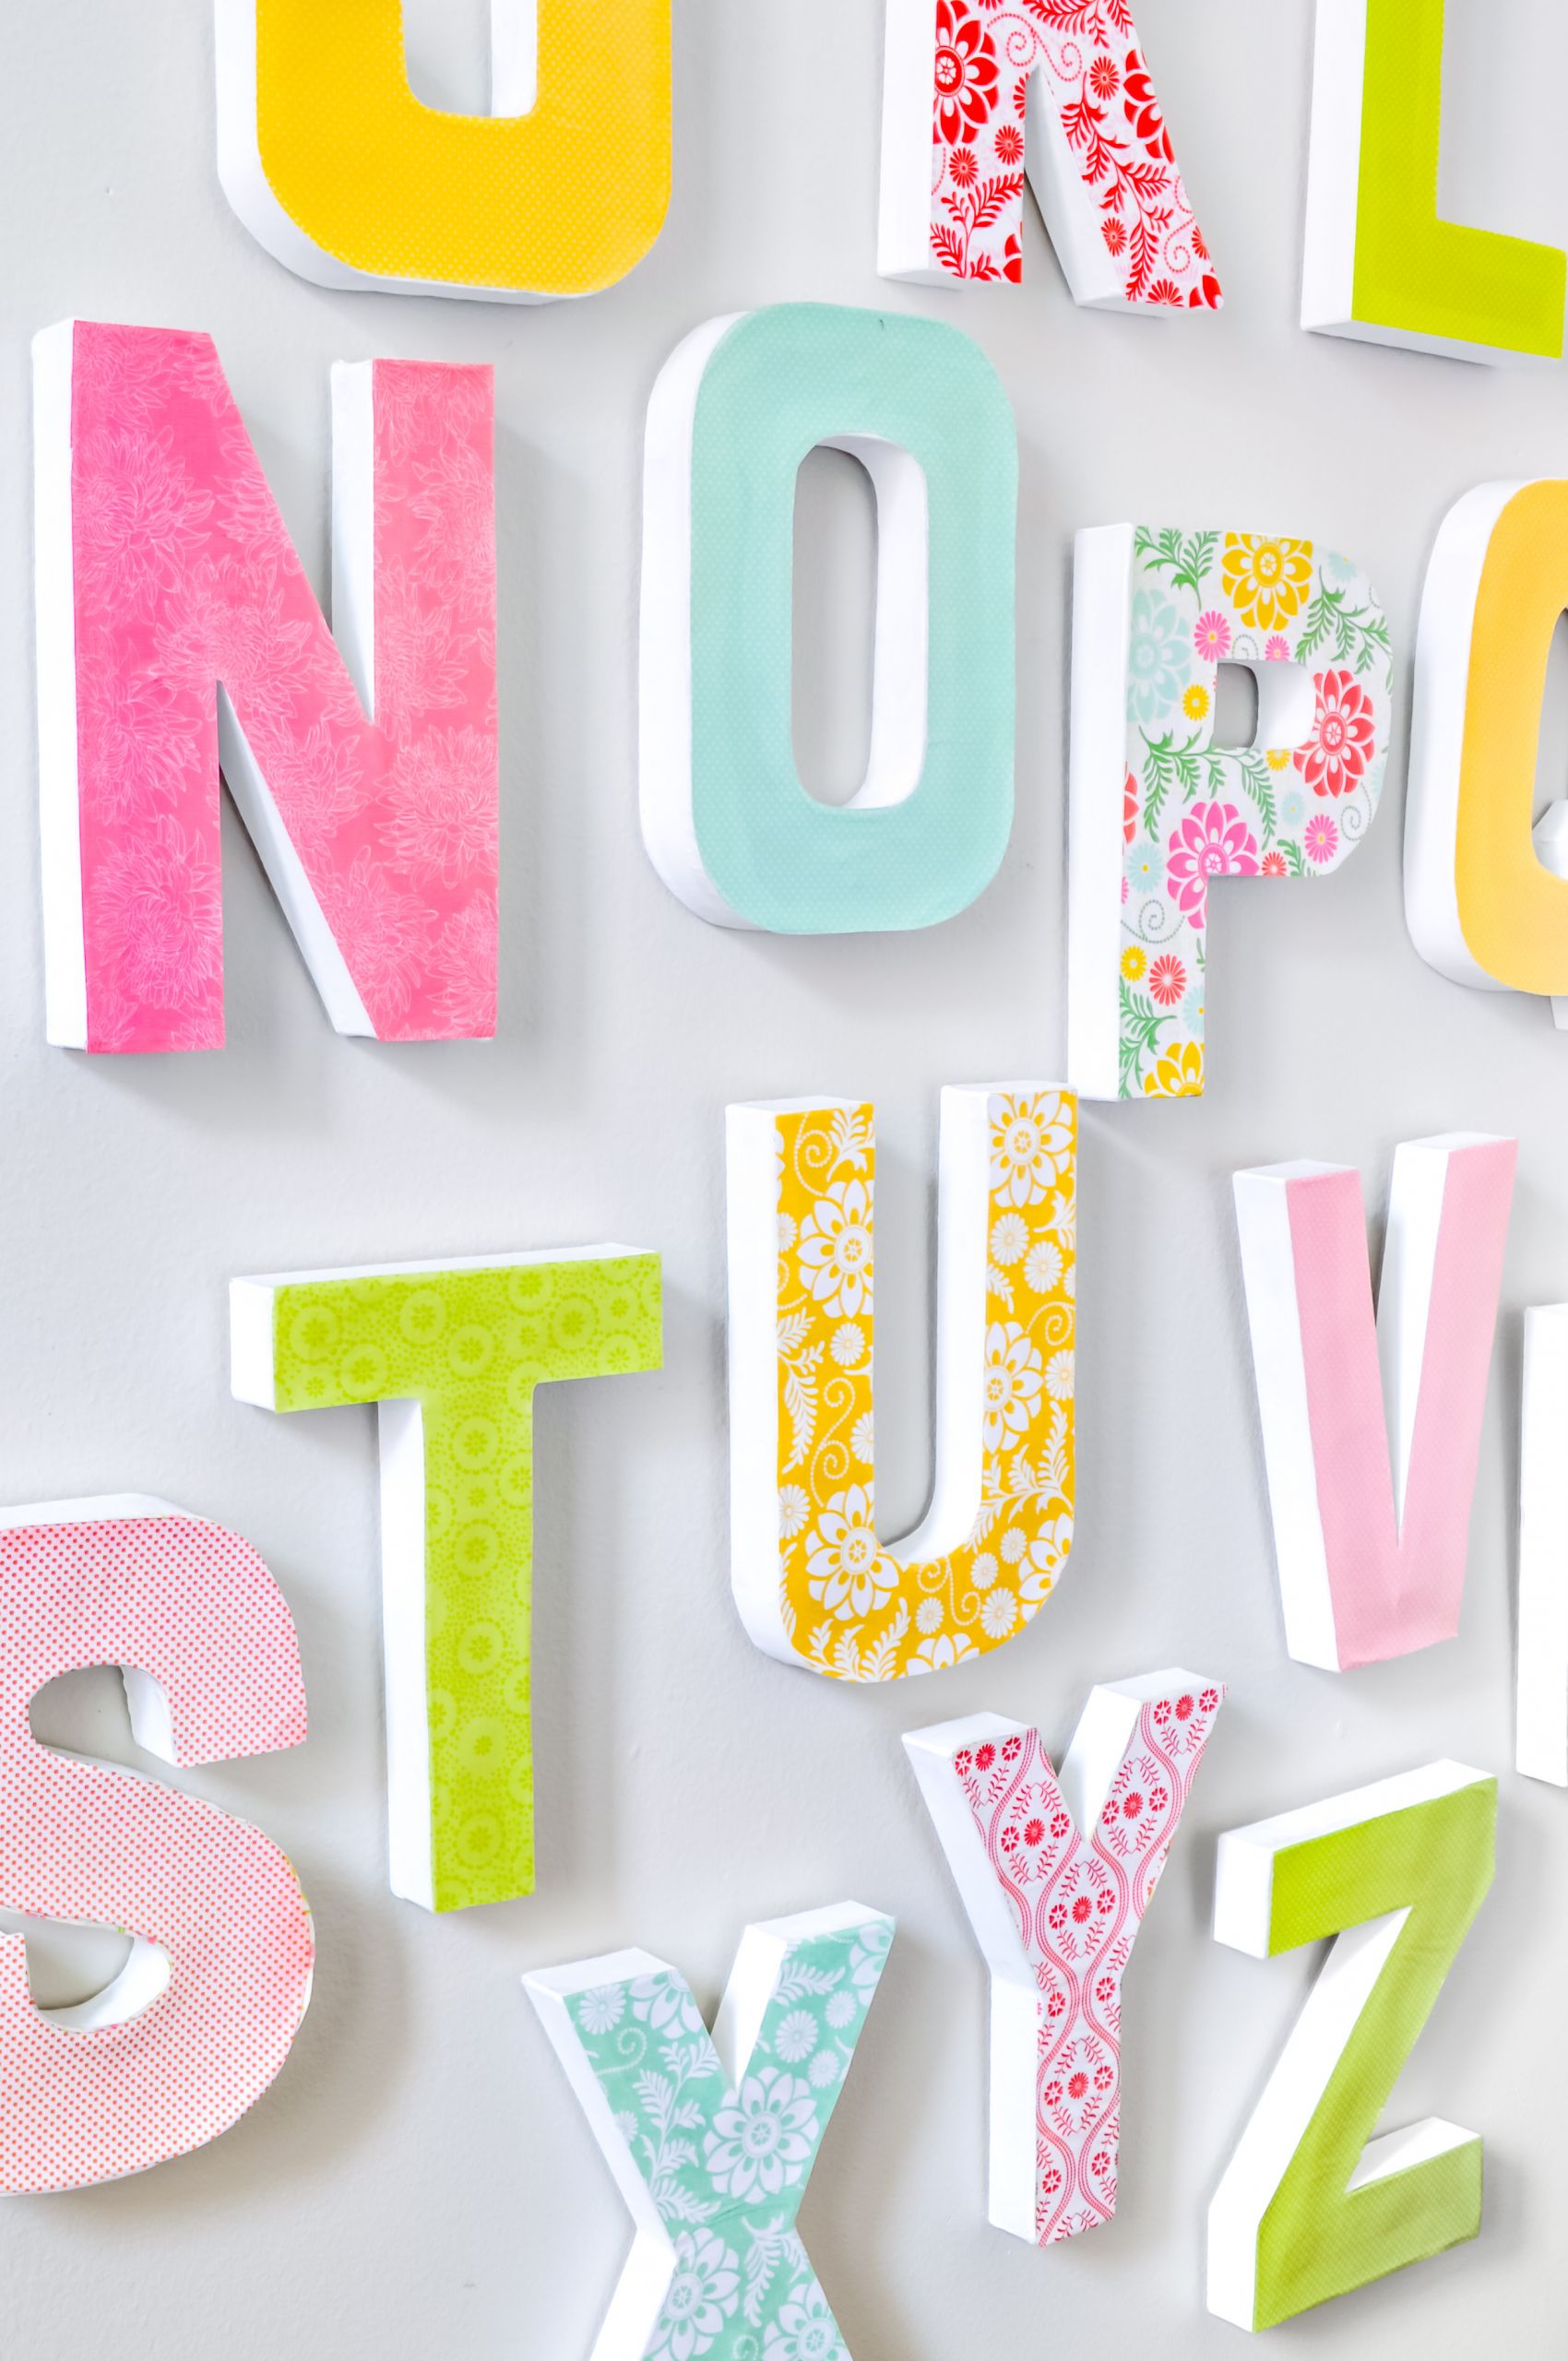 Decorative Letters DIY
 DIY Wall Letters Easy to Make and Customize for your